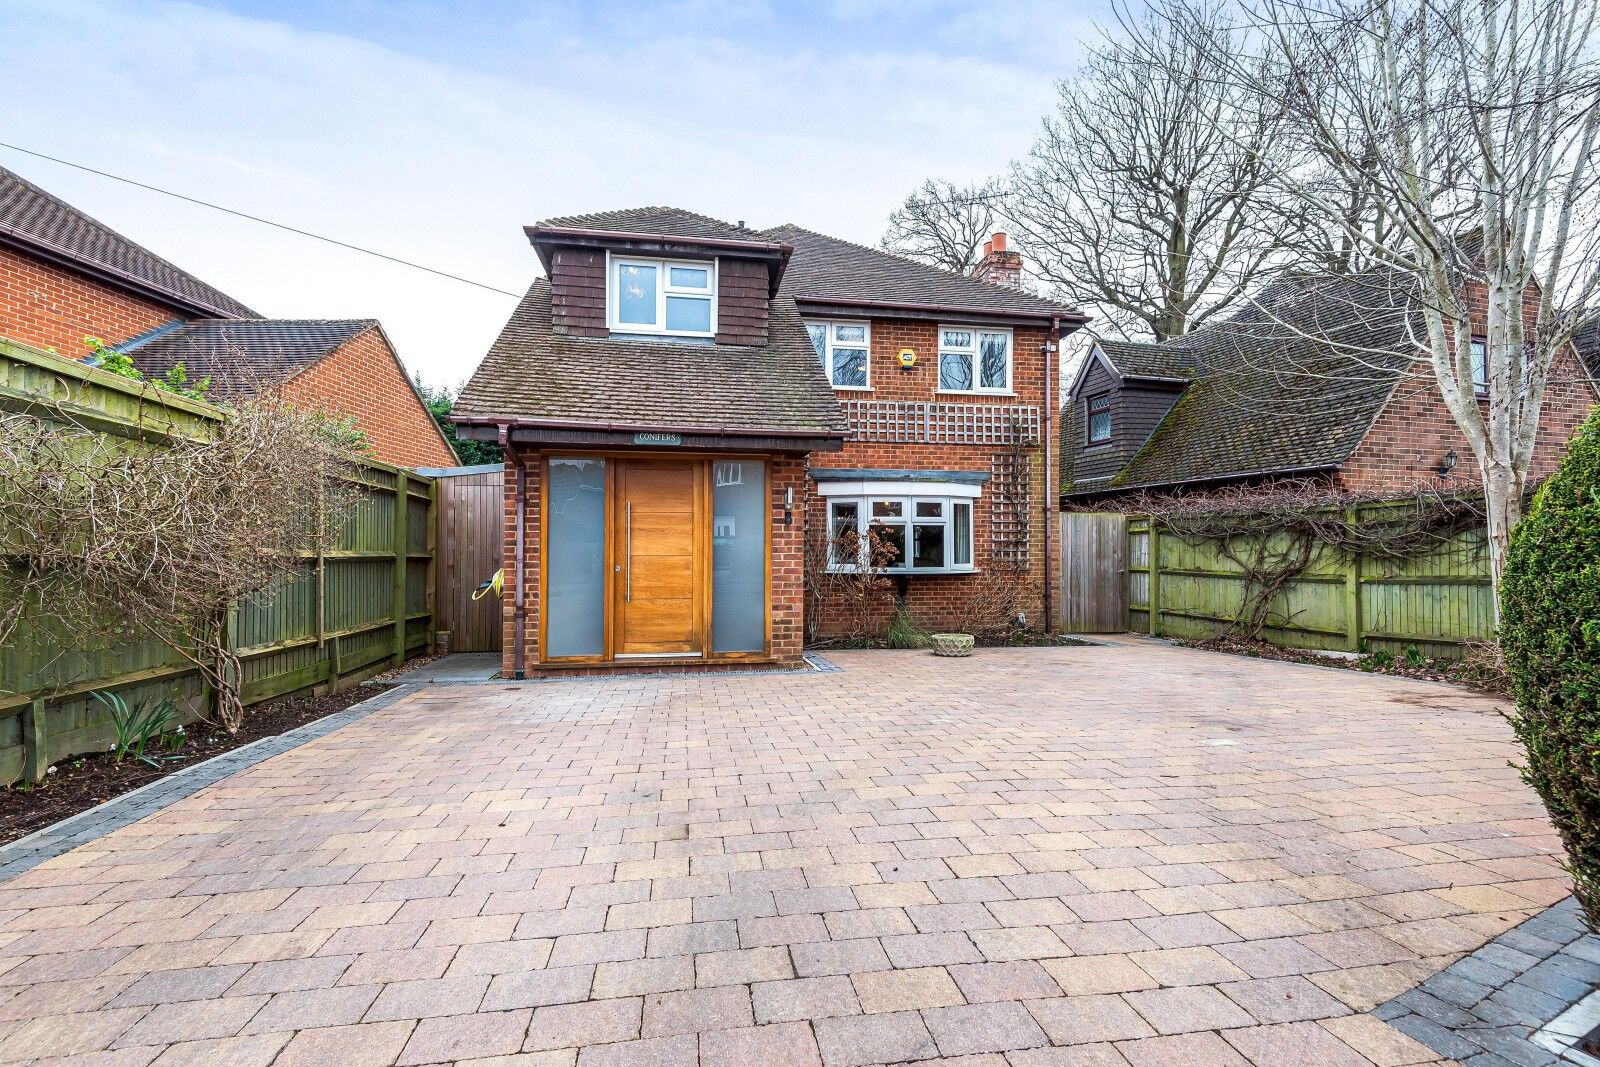 4 bedroom detached house to rent, Available now Woods Road, Caversham, RG4, main image